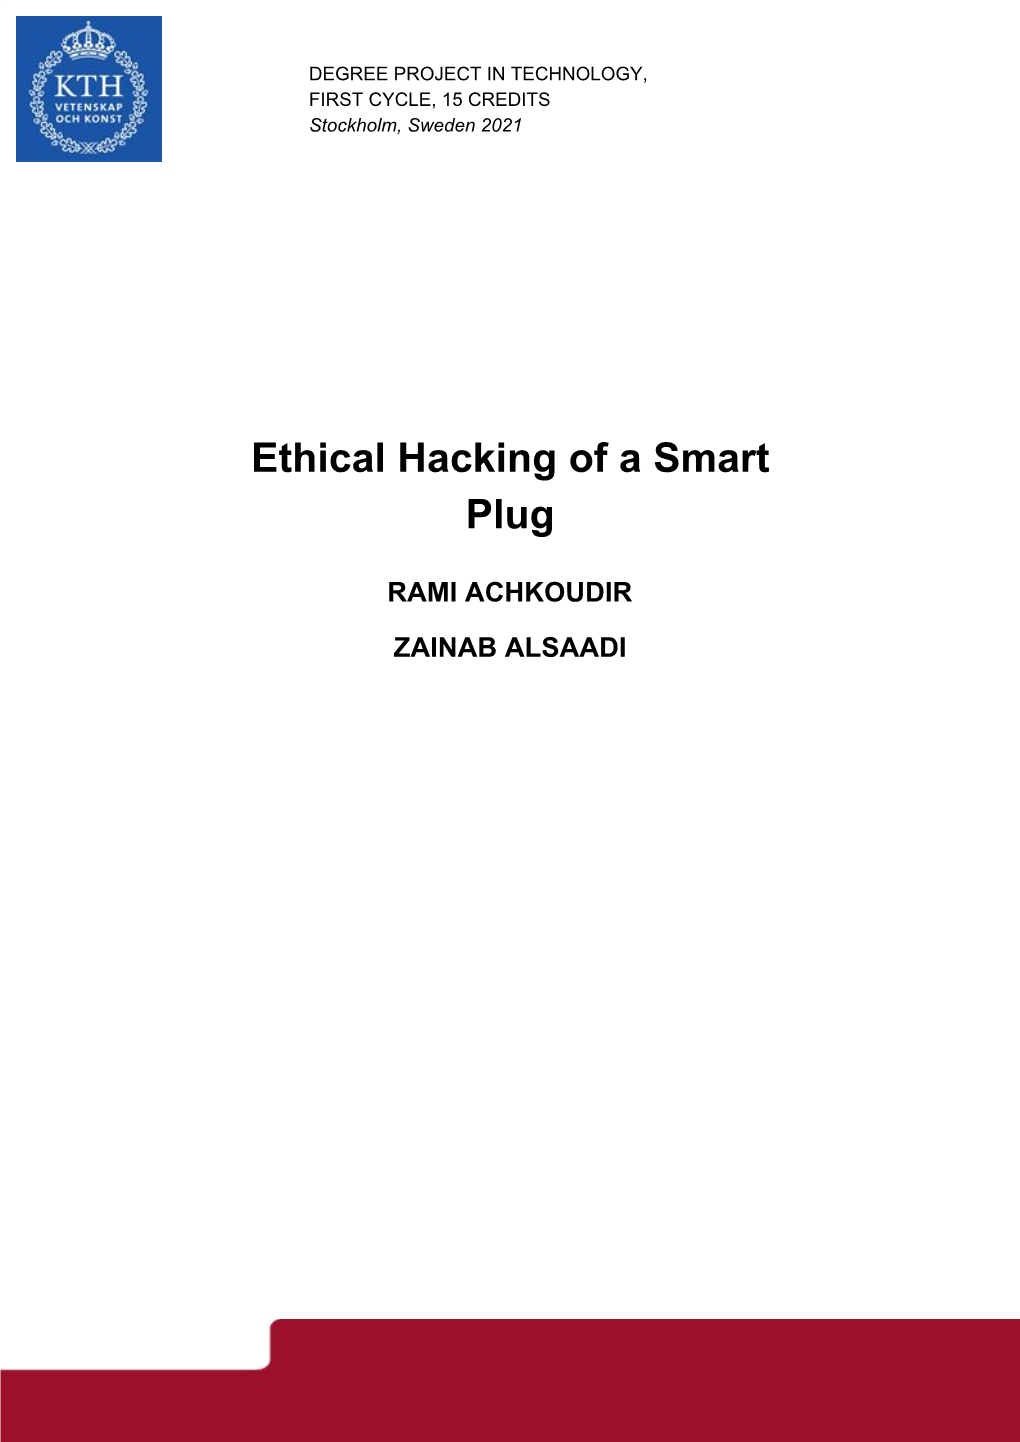 Ethical Hacking of a Smart Plug